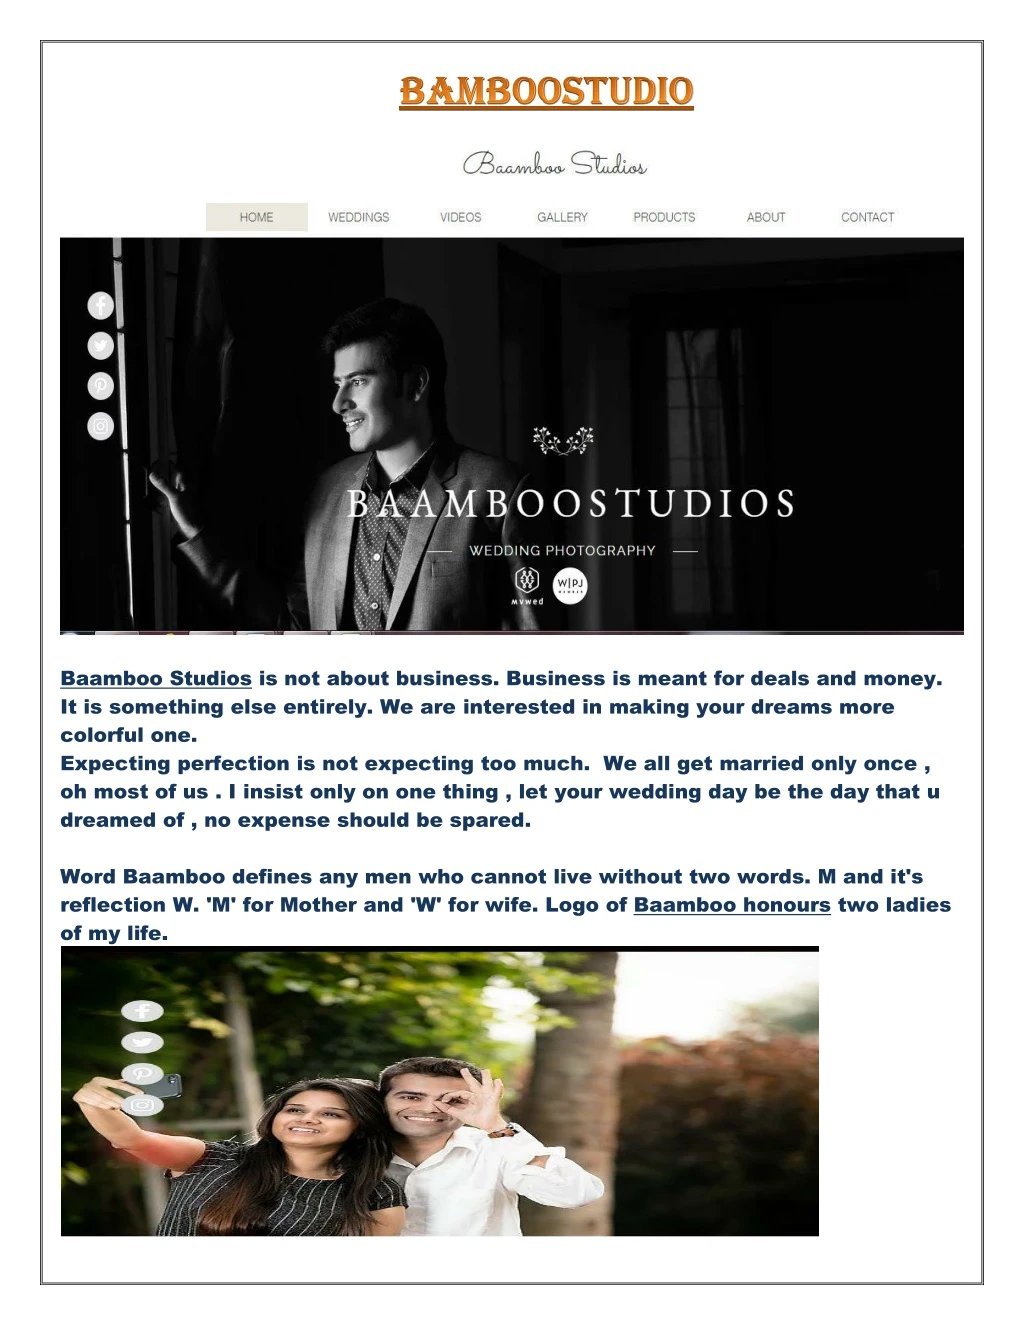 baamboo studios is not about business business